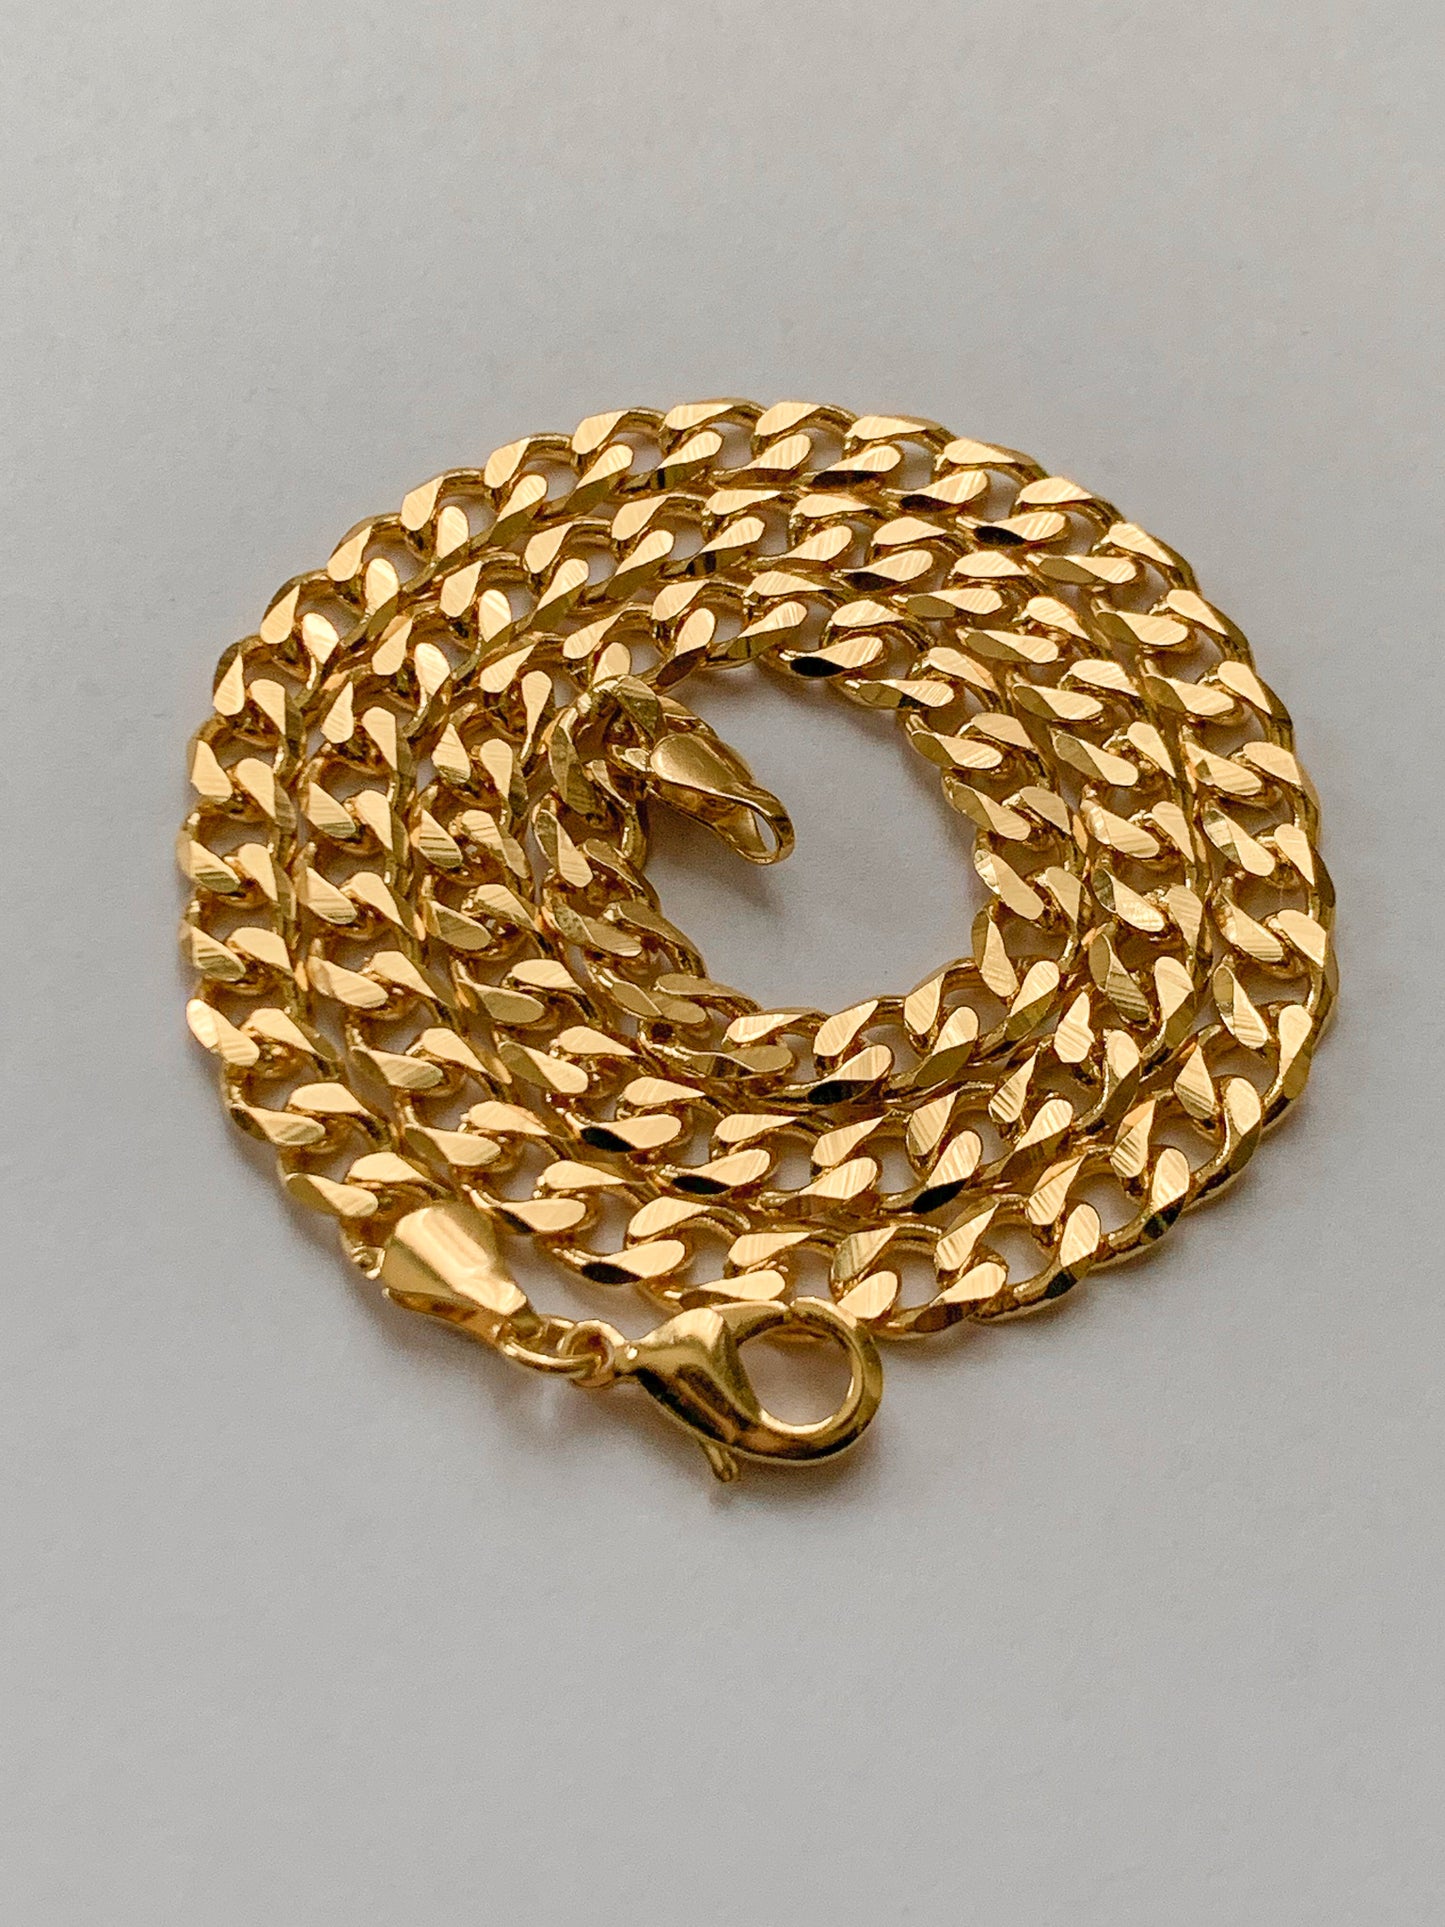 scarlet and saige koech curb chain necklace 18k gold filled